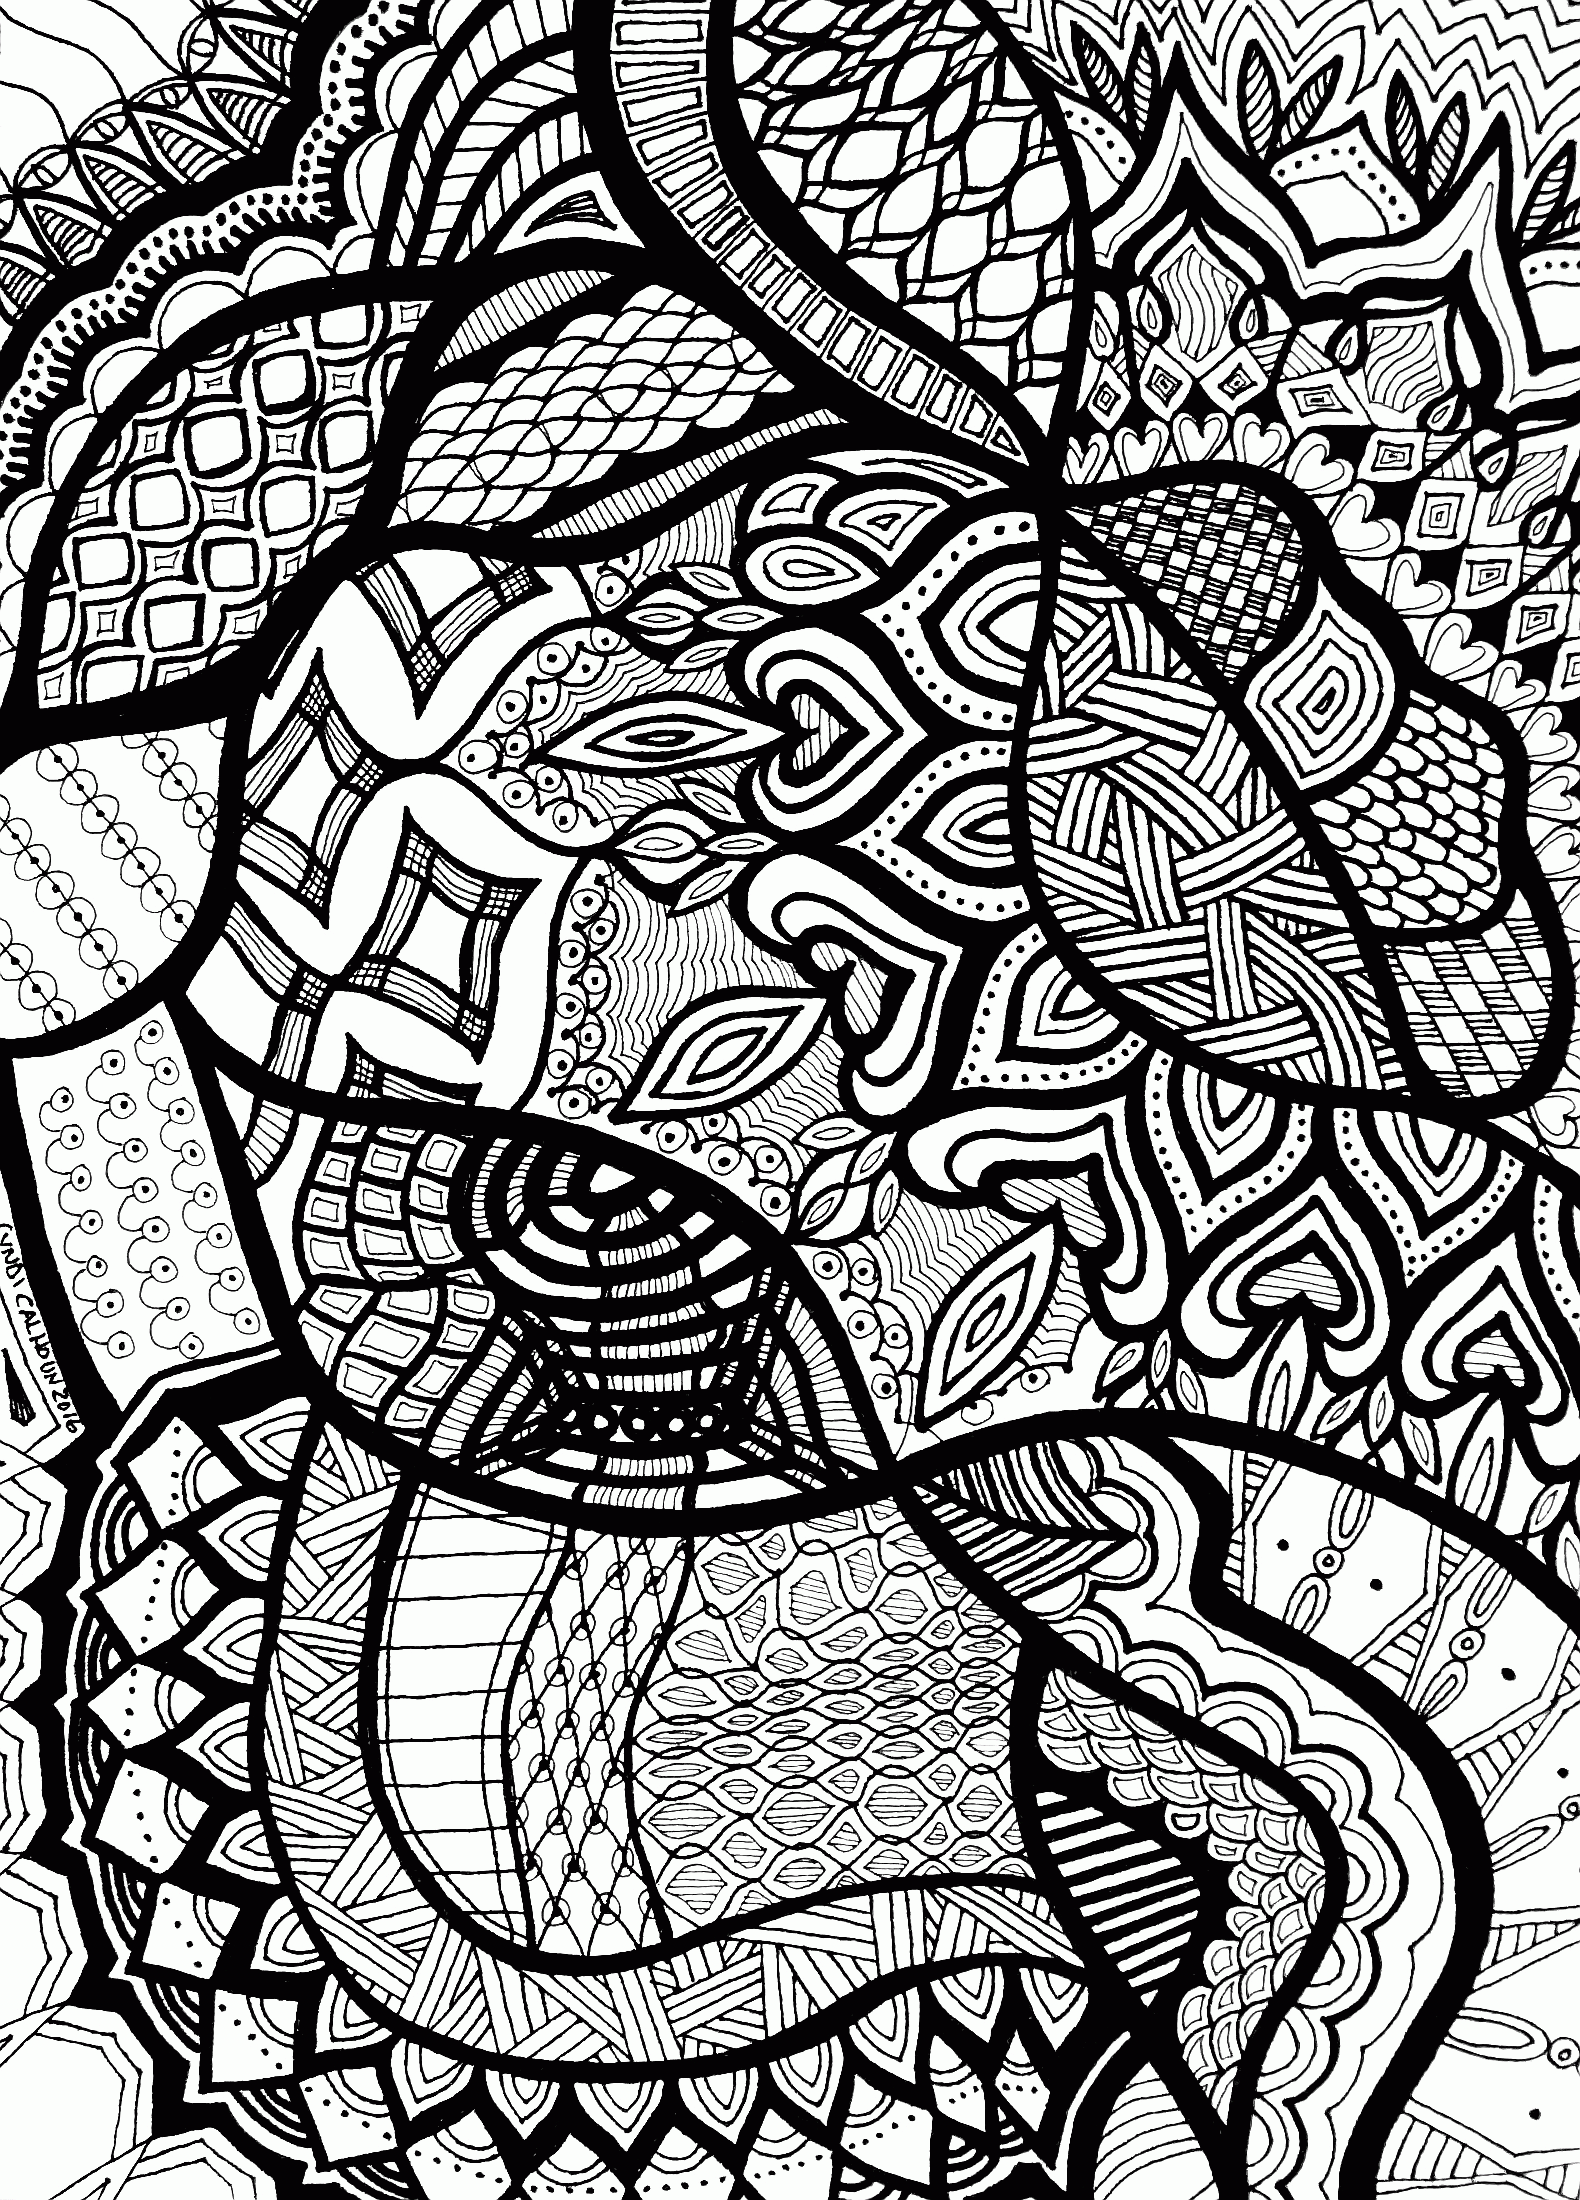 Coloring Pages Geometric Animals : Mandala with geometric patterns and Wolf head full of ... - 1000x1403 geometric animal coloring pages for snazzy pict printable.